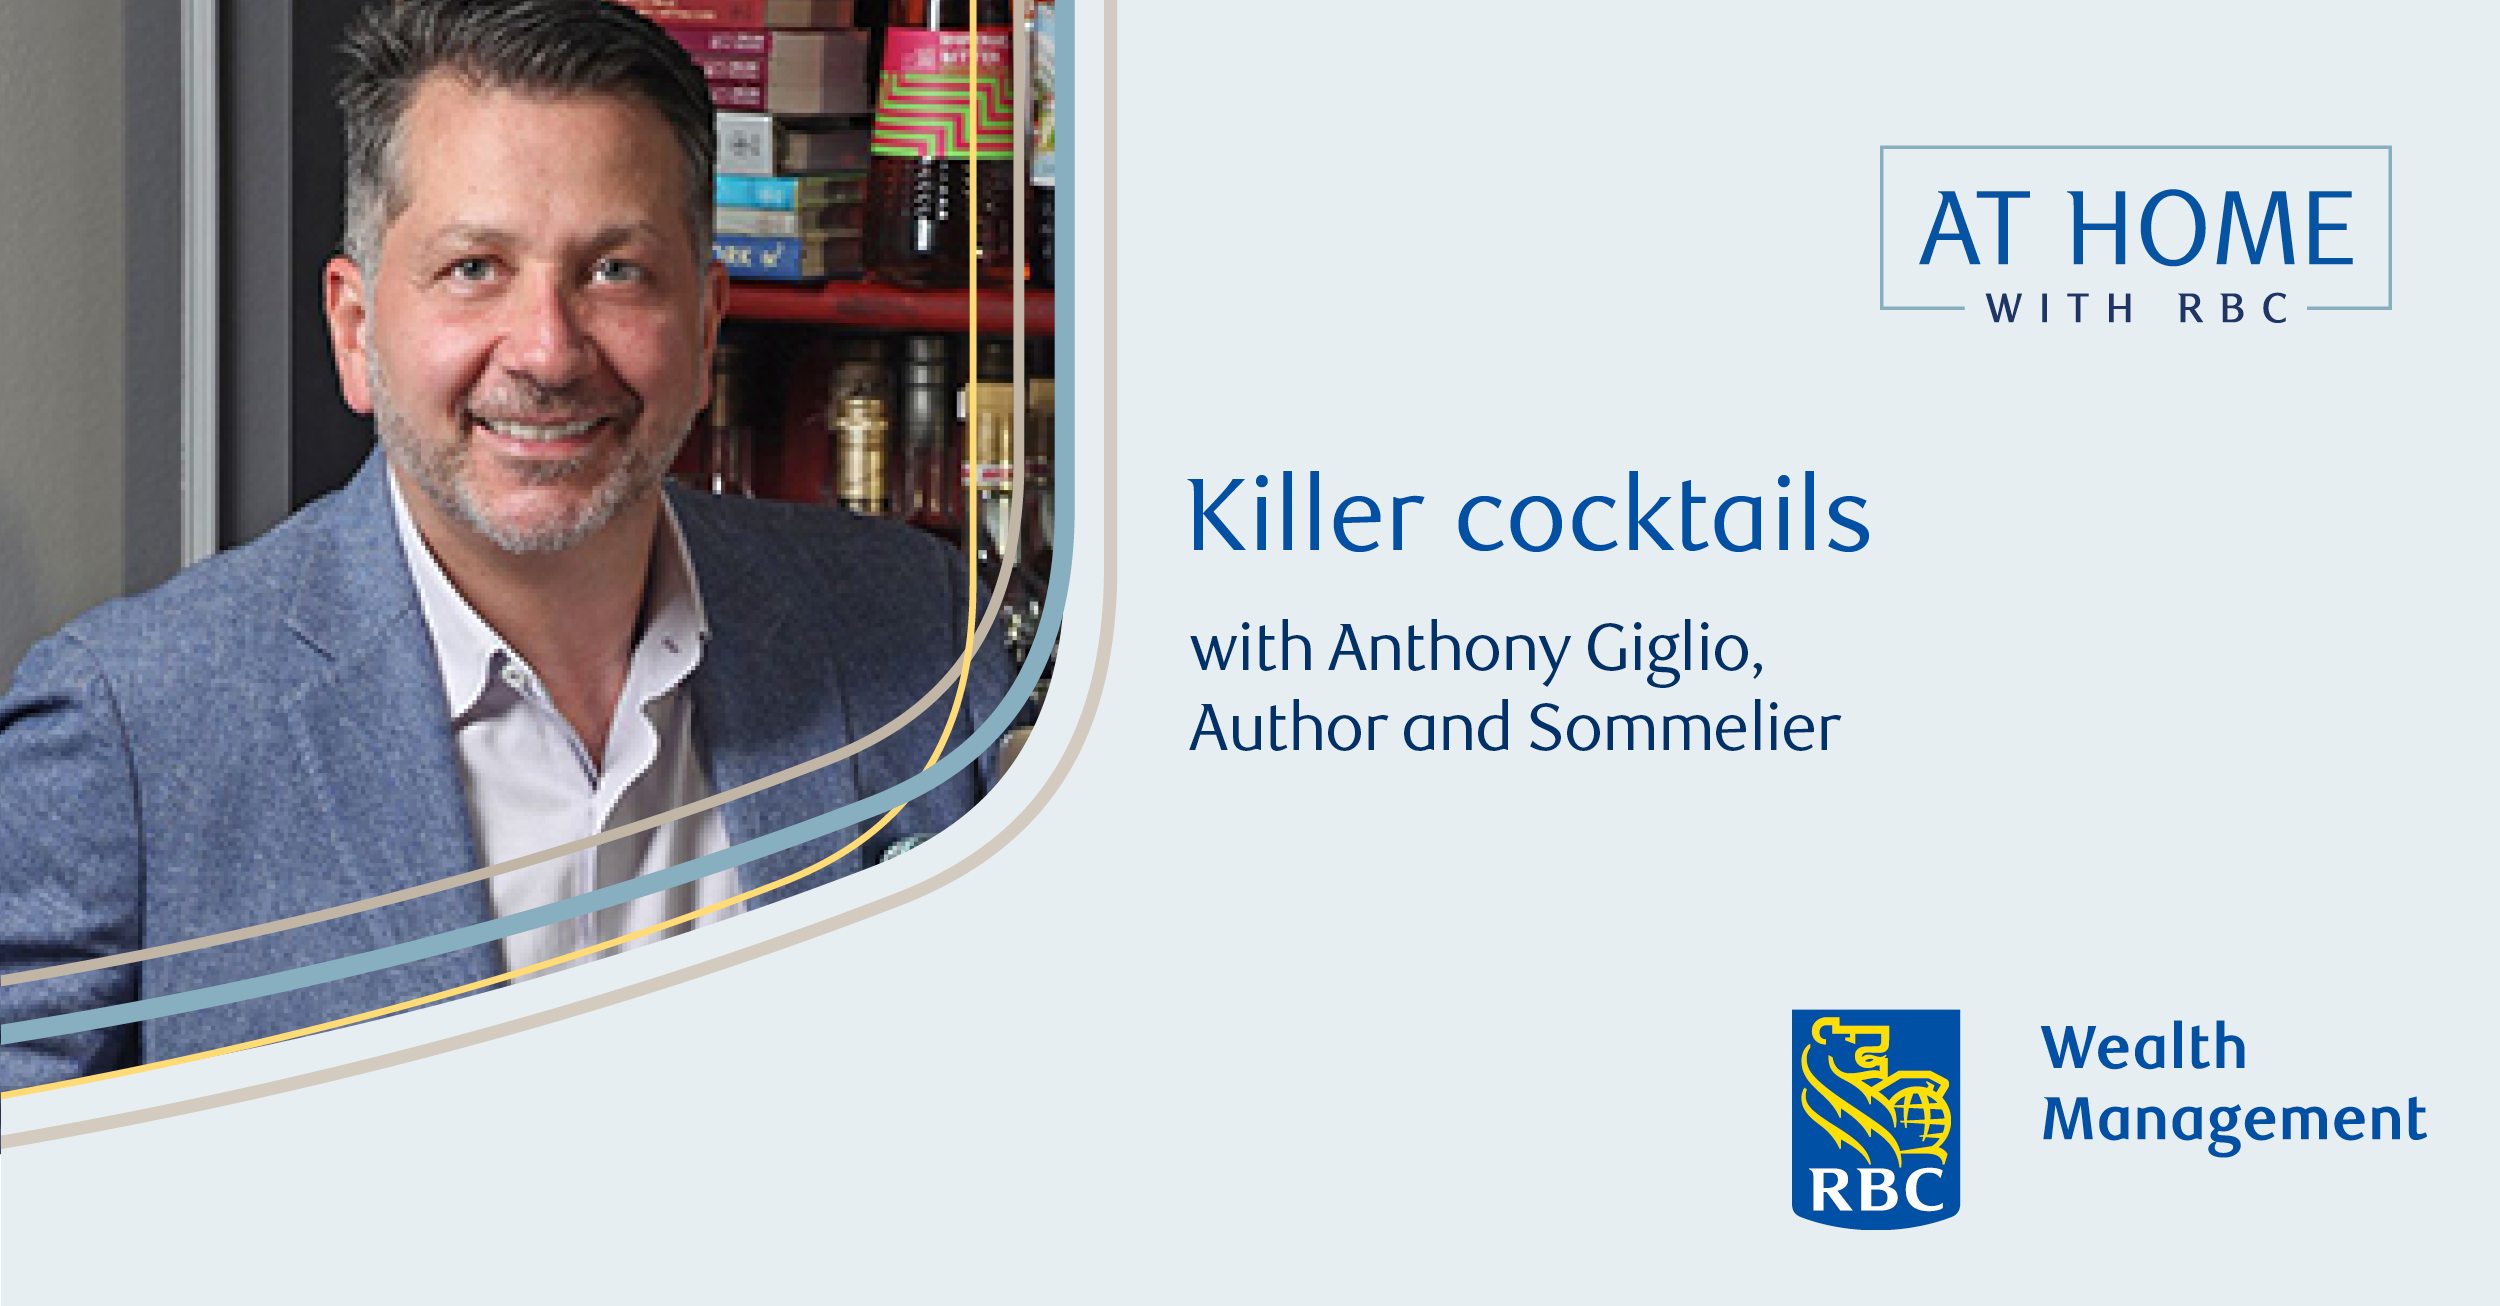 At Home with RBC Killer Cocktails